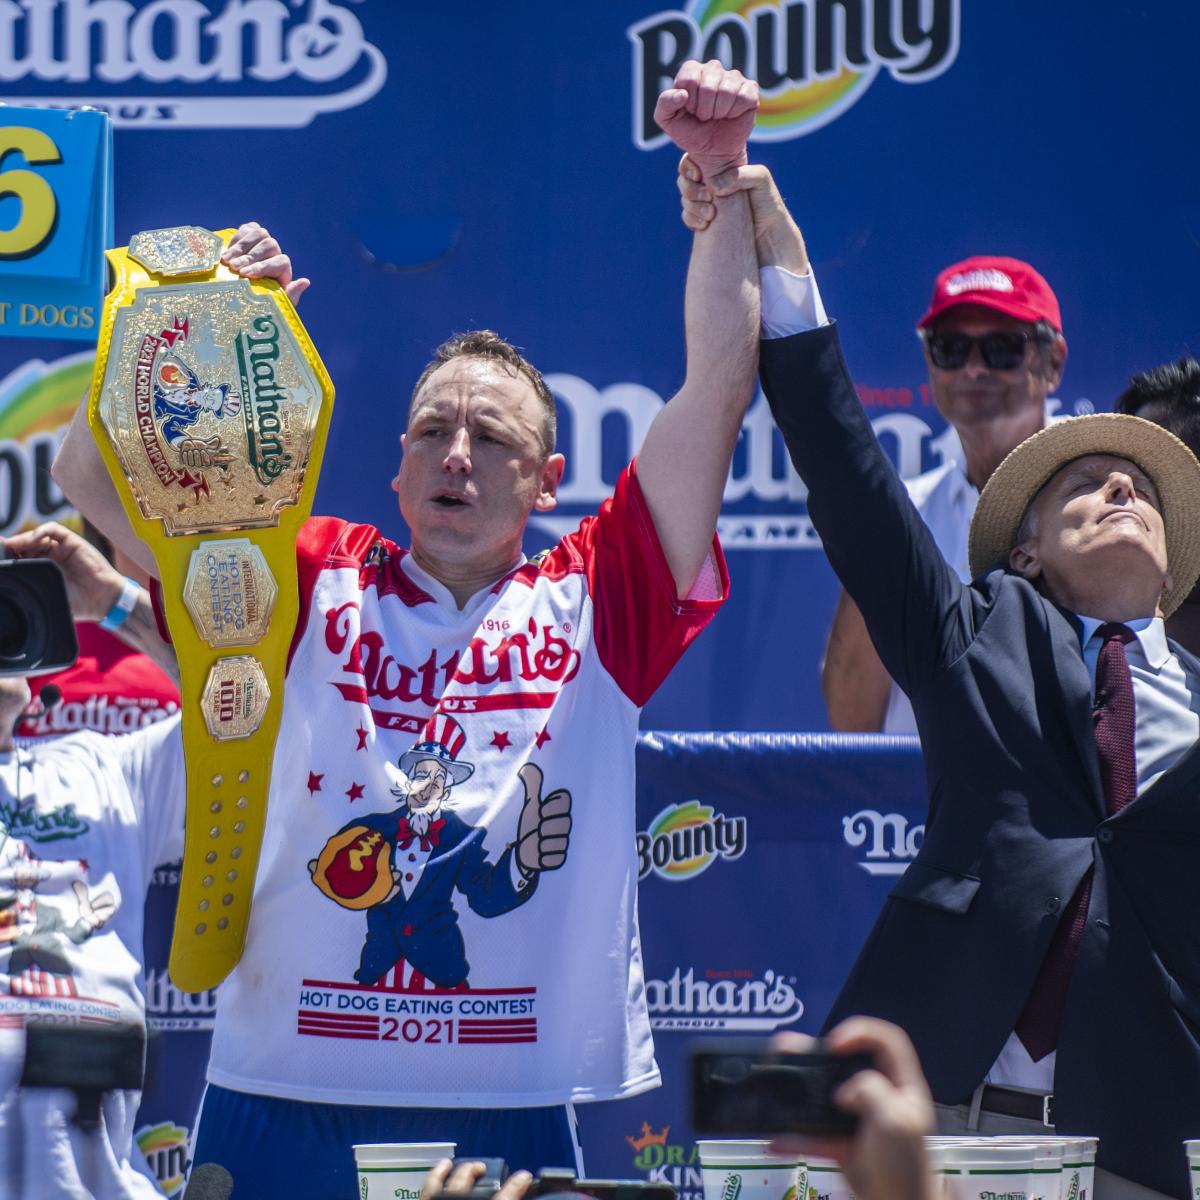 Nathan's Hot Dog Eating Contest 2021: Joey Chestnut's Final Stats, Prize Money